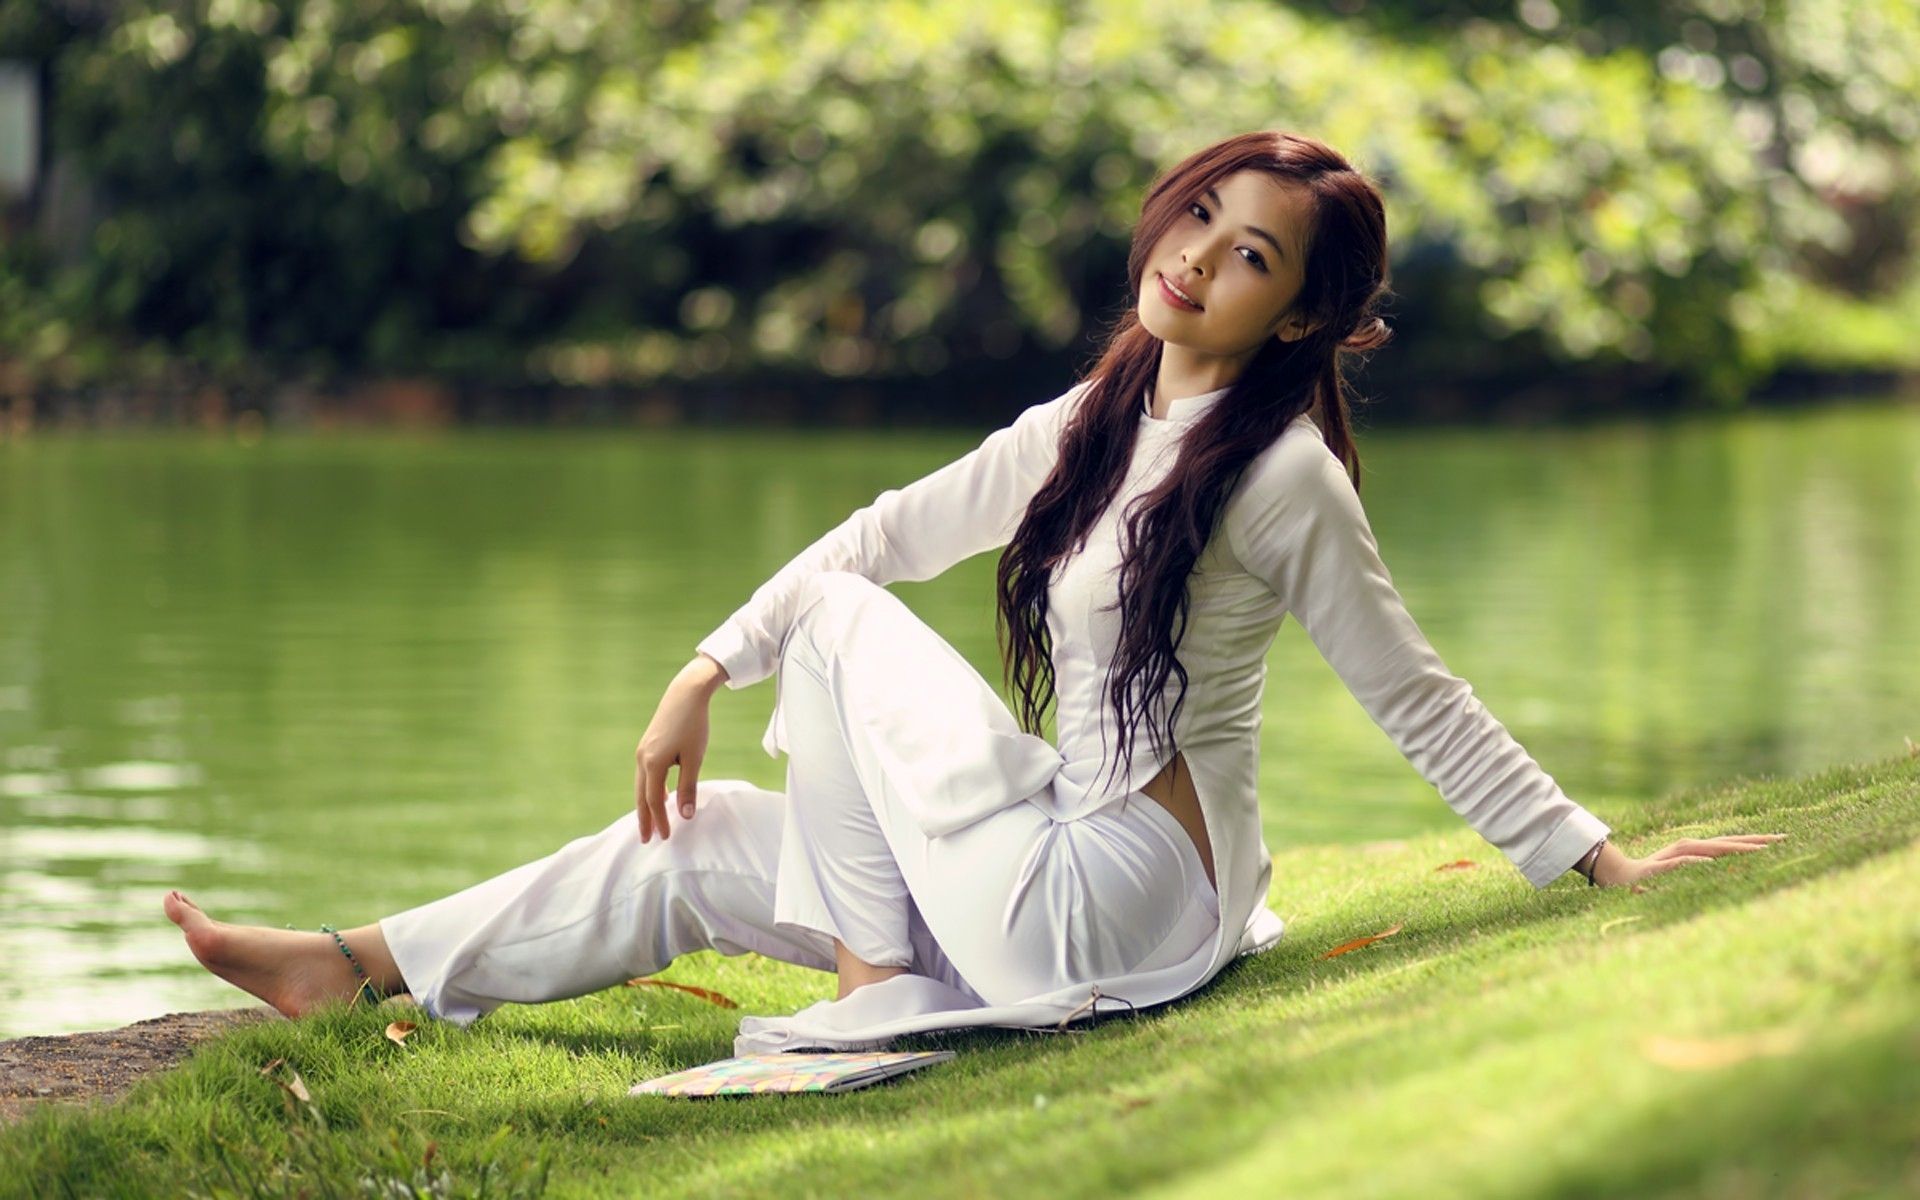 Download 1920x1200 Women viet nam asians ao dai depth of field cure girl anklets Wallpaper